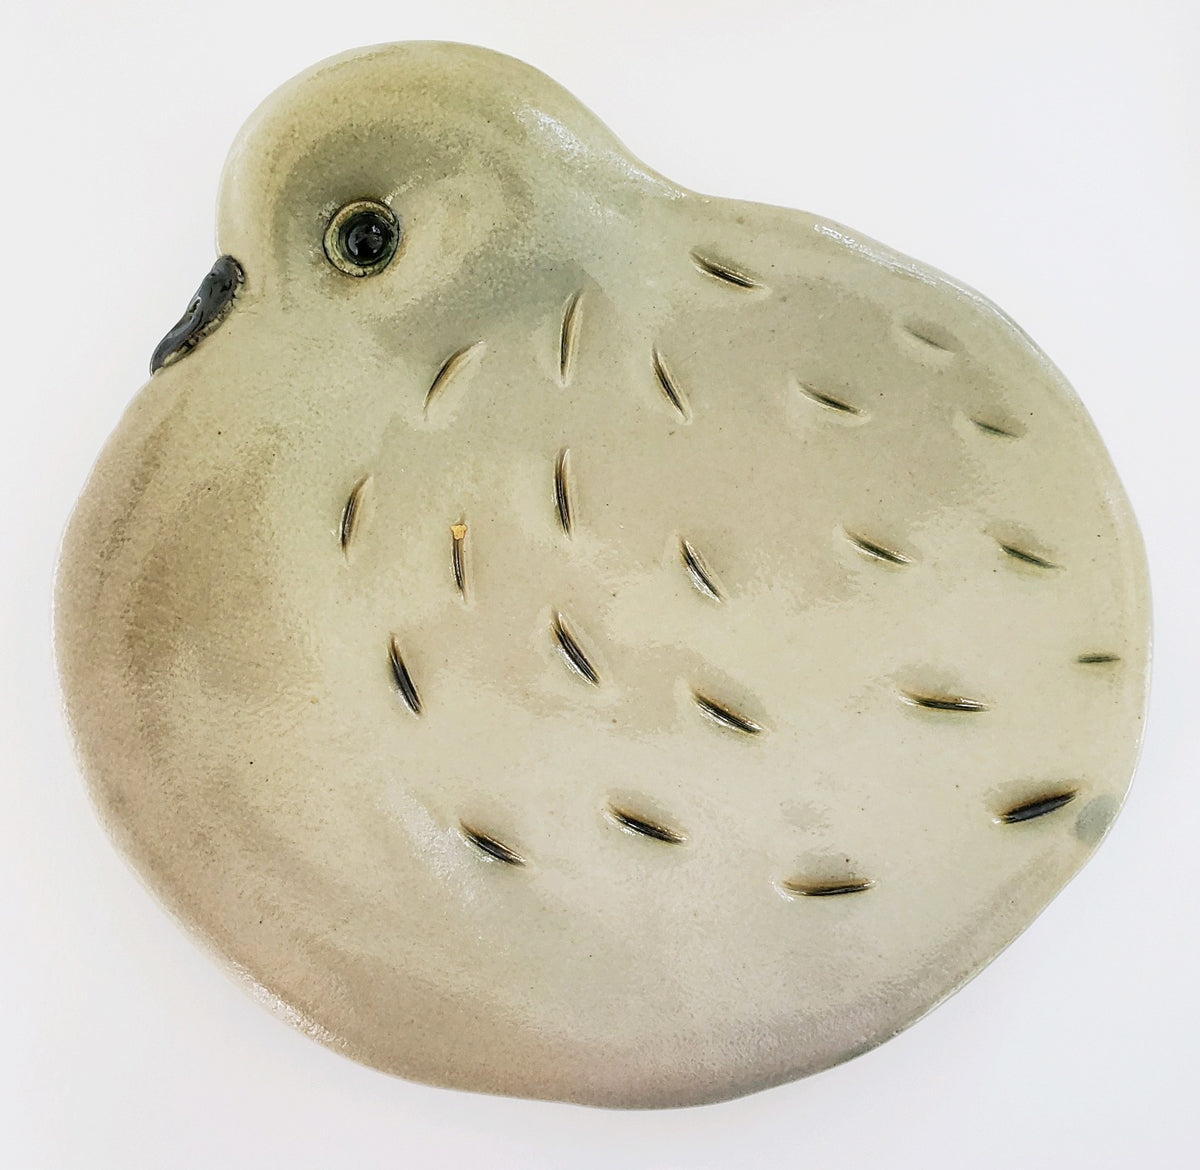 69. Mourning Dove Soap Dish